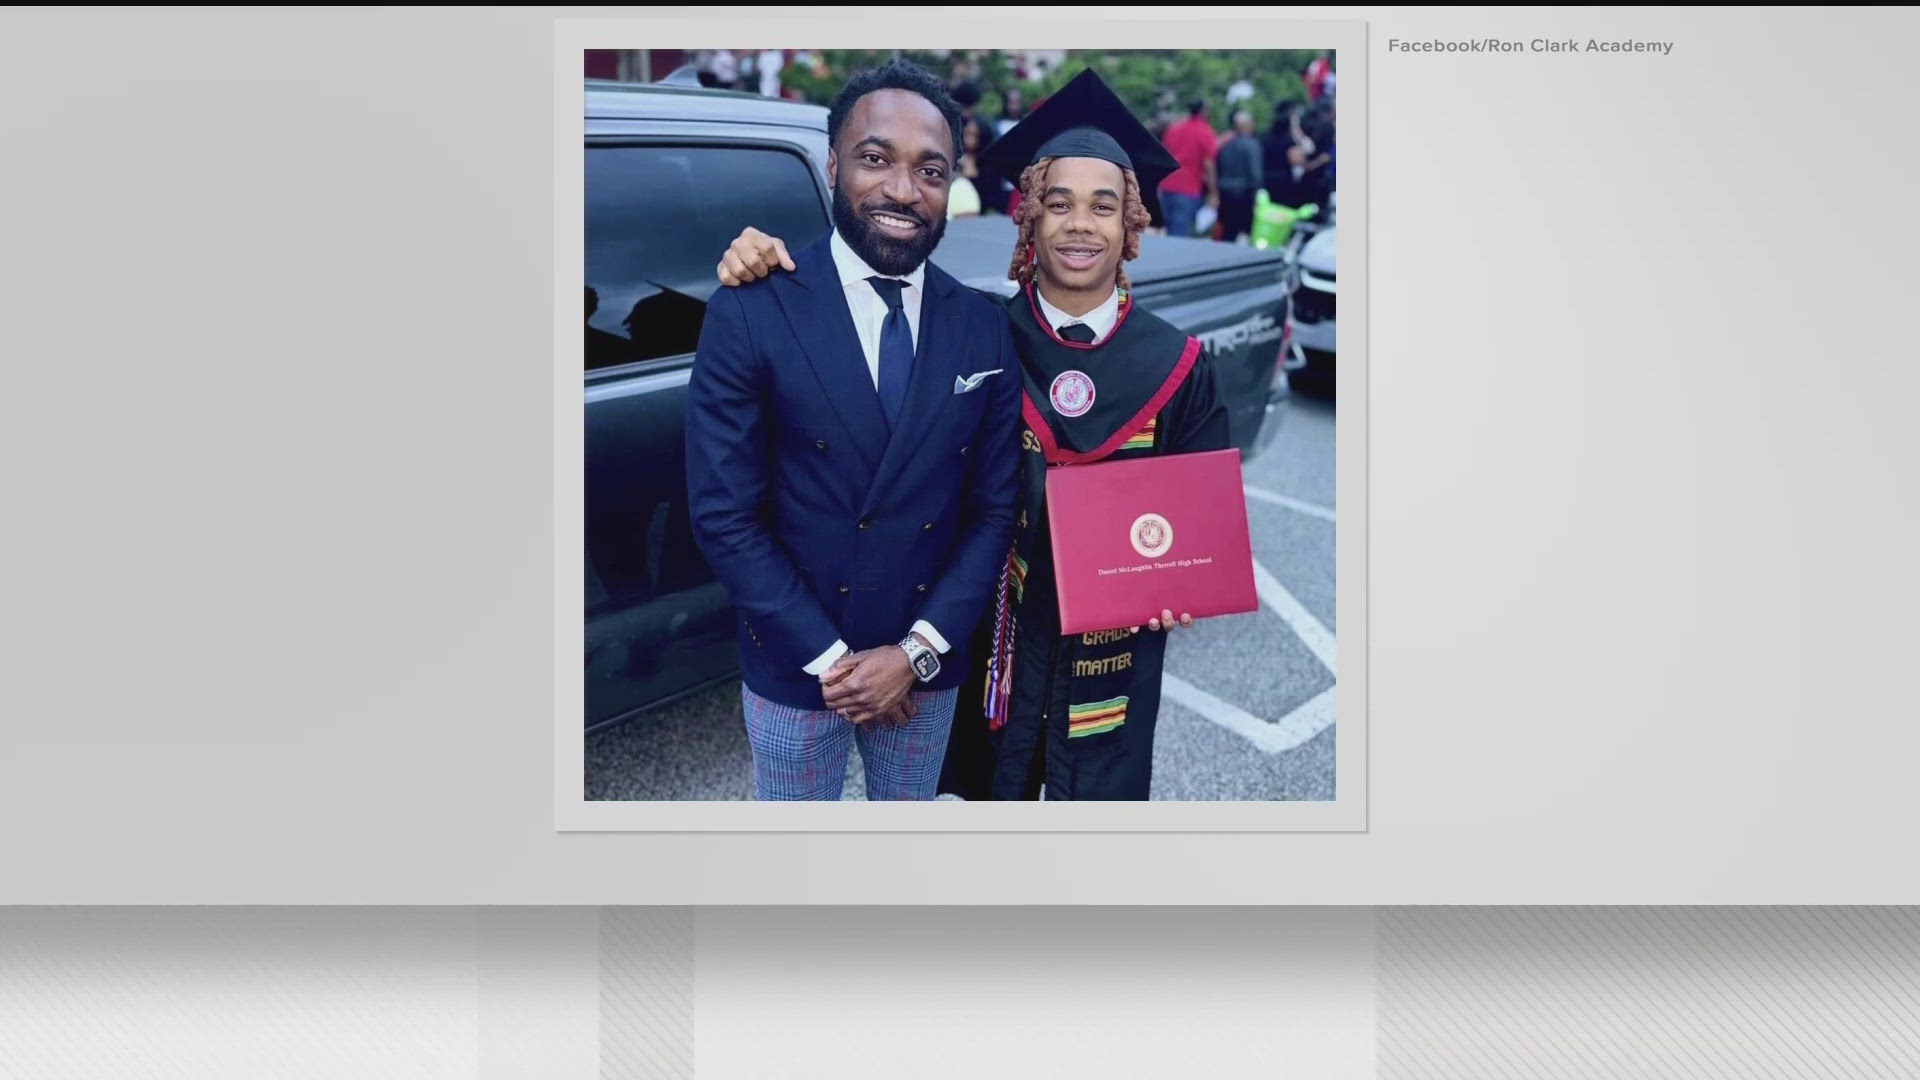 In 2018, a group of Ron Clark Academy students going to see the Black Panther movie went viral. Now, Jaycob is graduating.